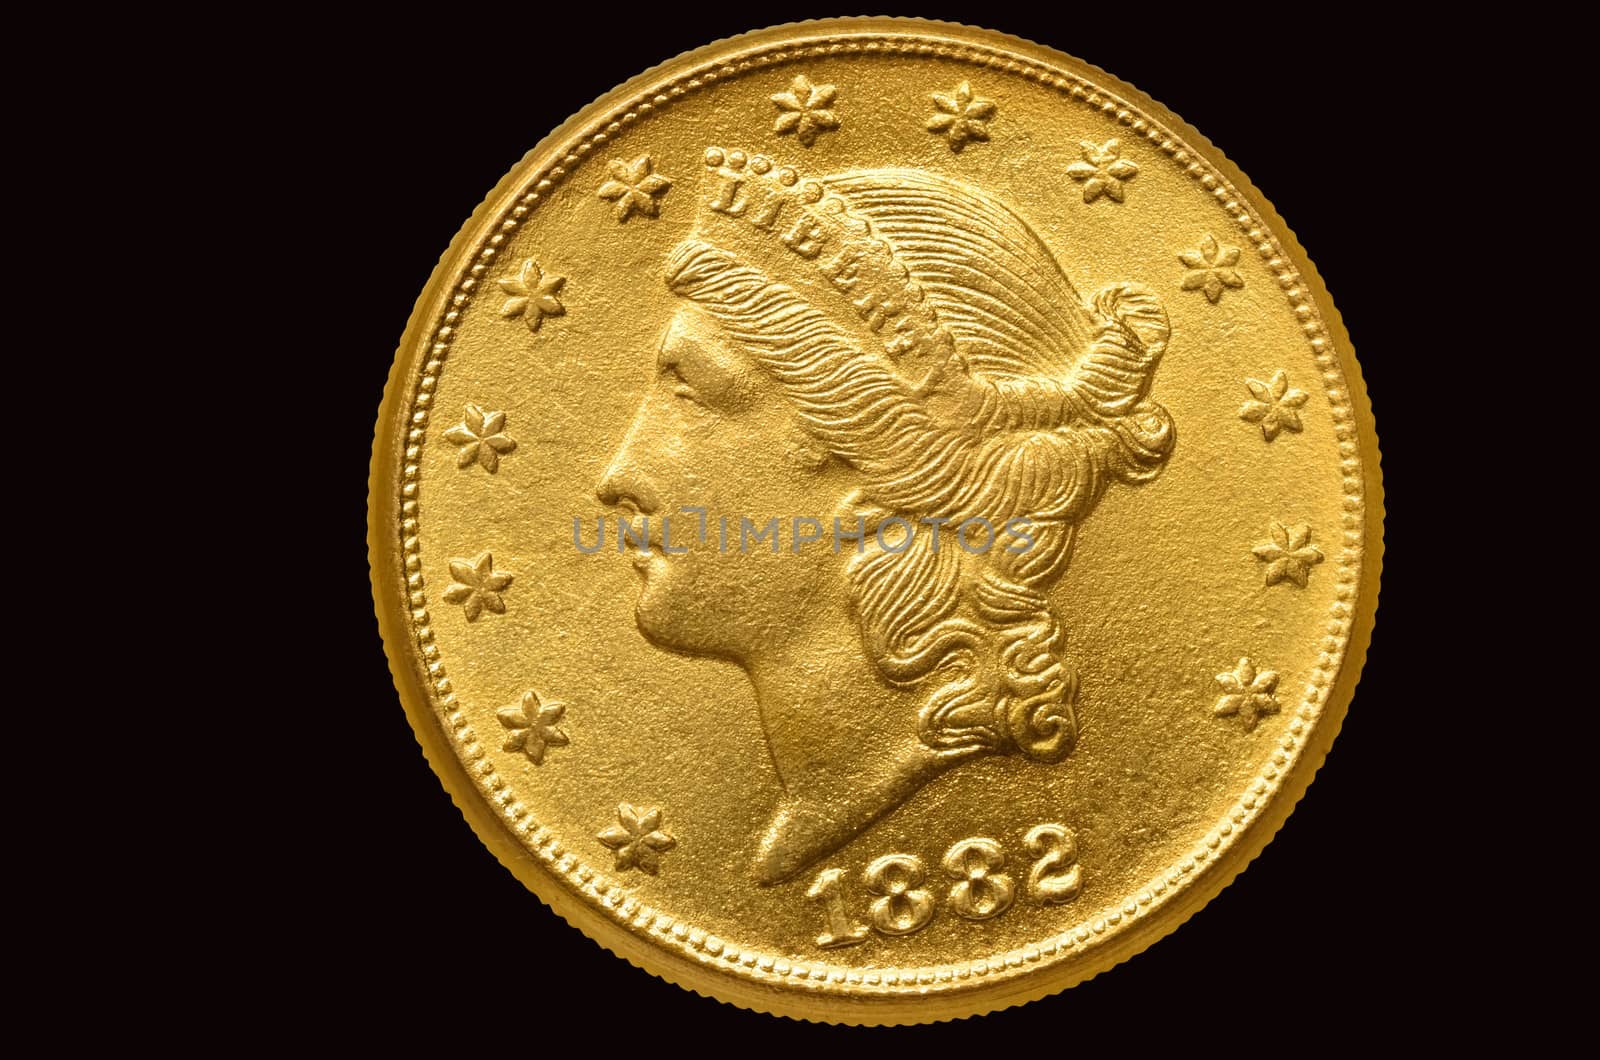 20 Liberty golden dollar coin. Isolated with path on black background